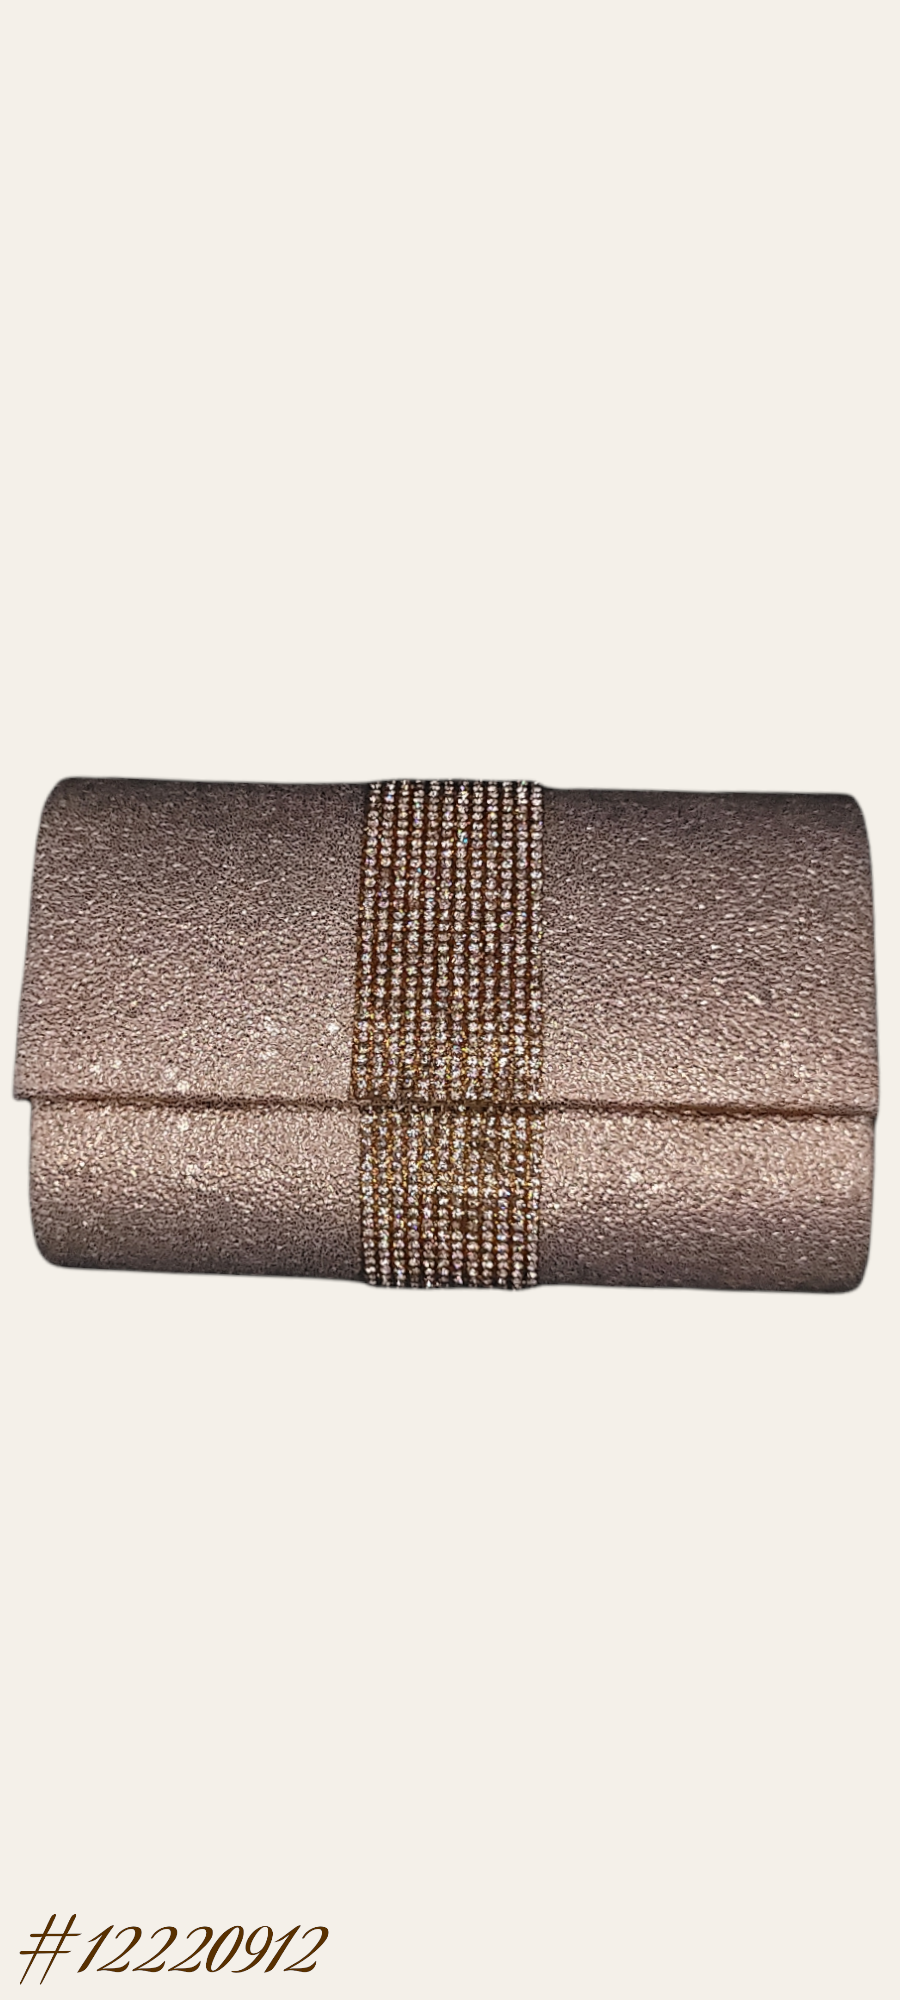 LOVELY ROSE GOLD CLUTCH WITH DIAMONDS